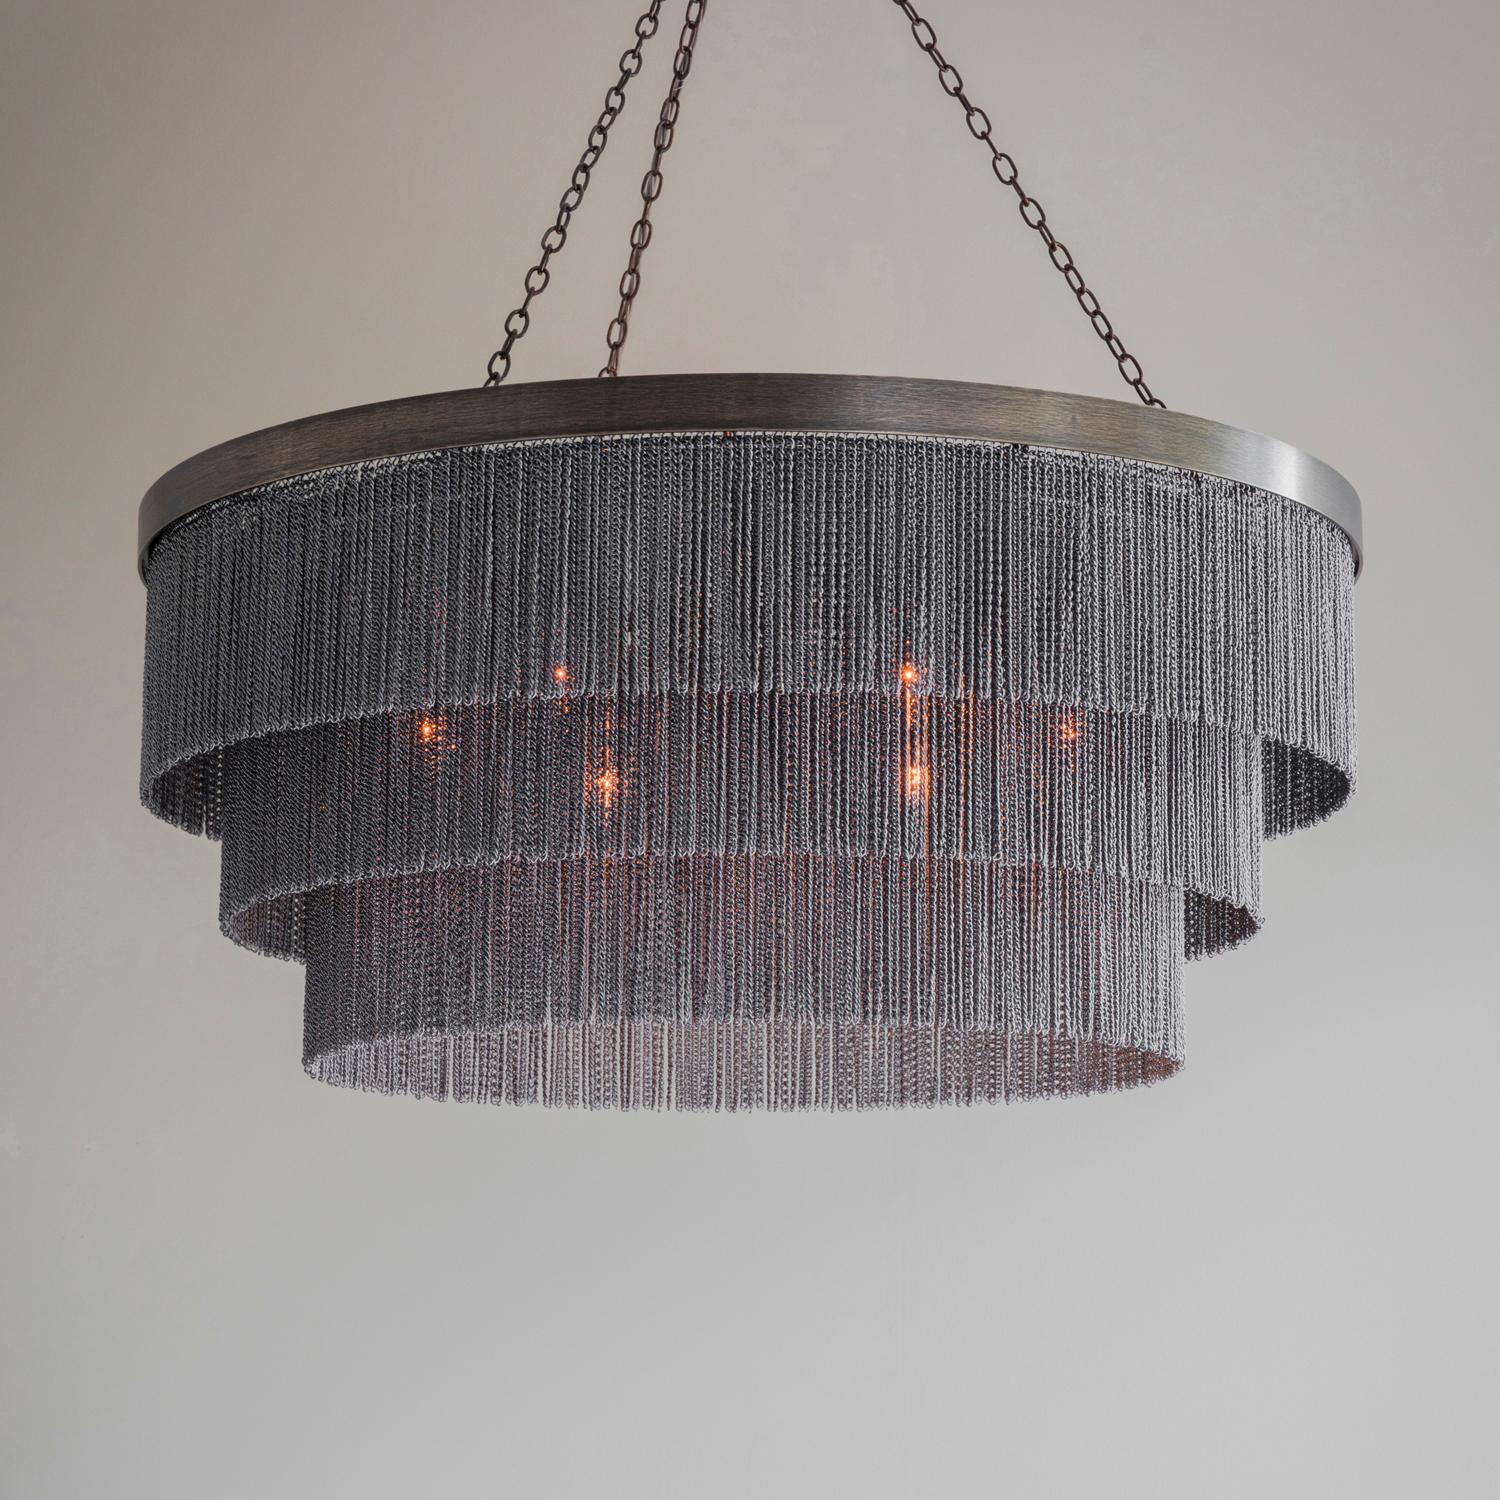 Contemporary chandelier with three shallow tiers of delicate chain strands and handcrafted metalwork. Available in bronze, gold or flat nickel metalwork with either black or silver decorative chain.

Designed and handmade by Tigermoth Lighting on